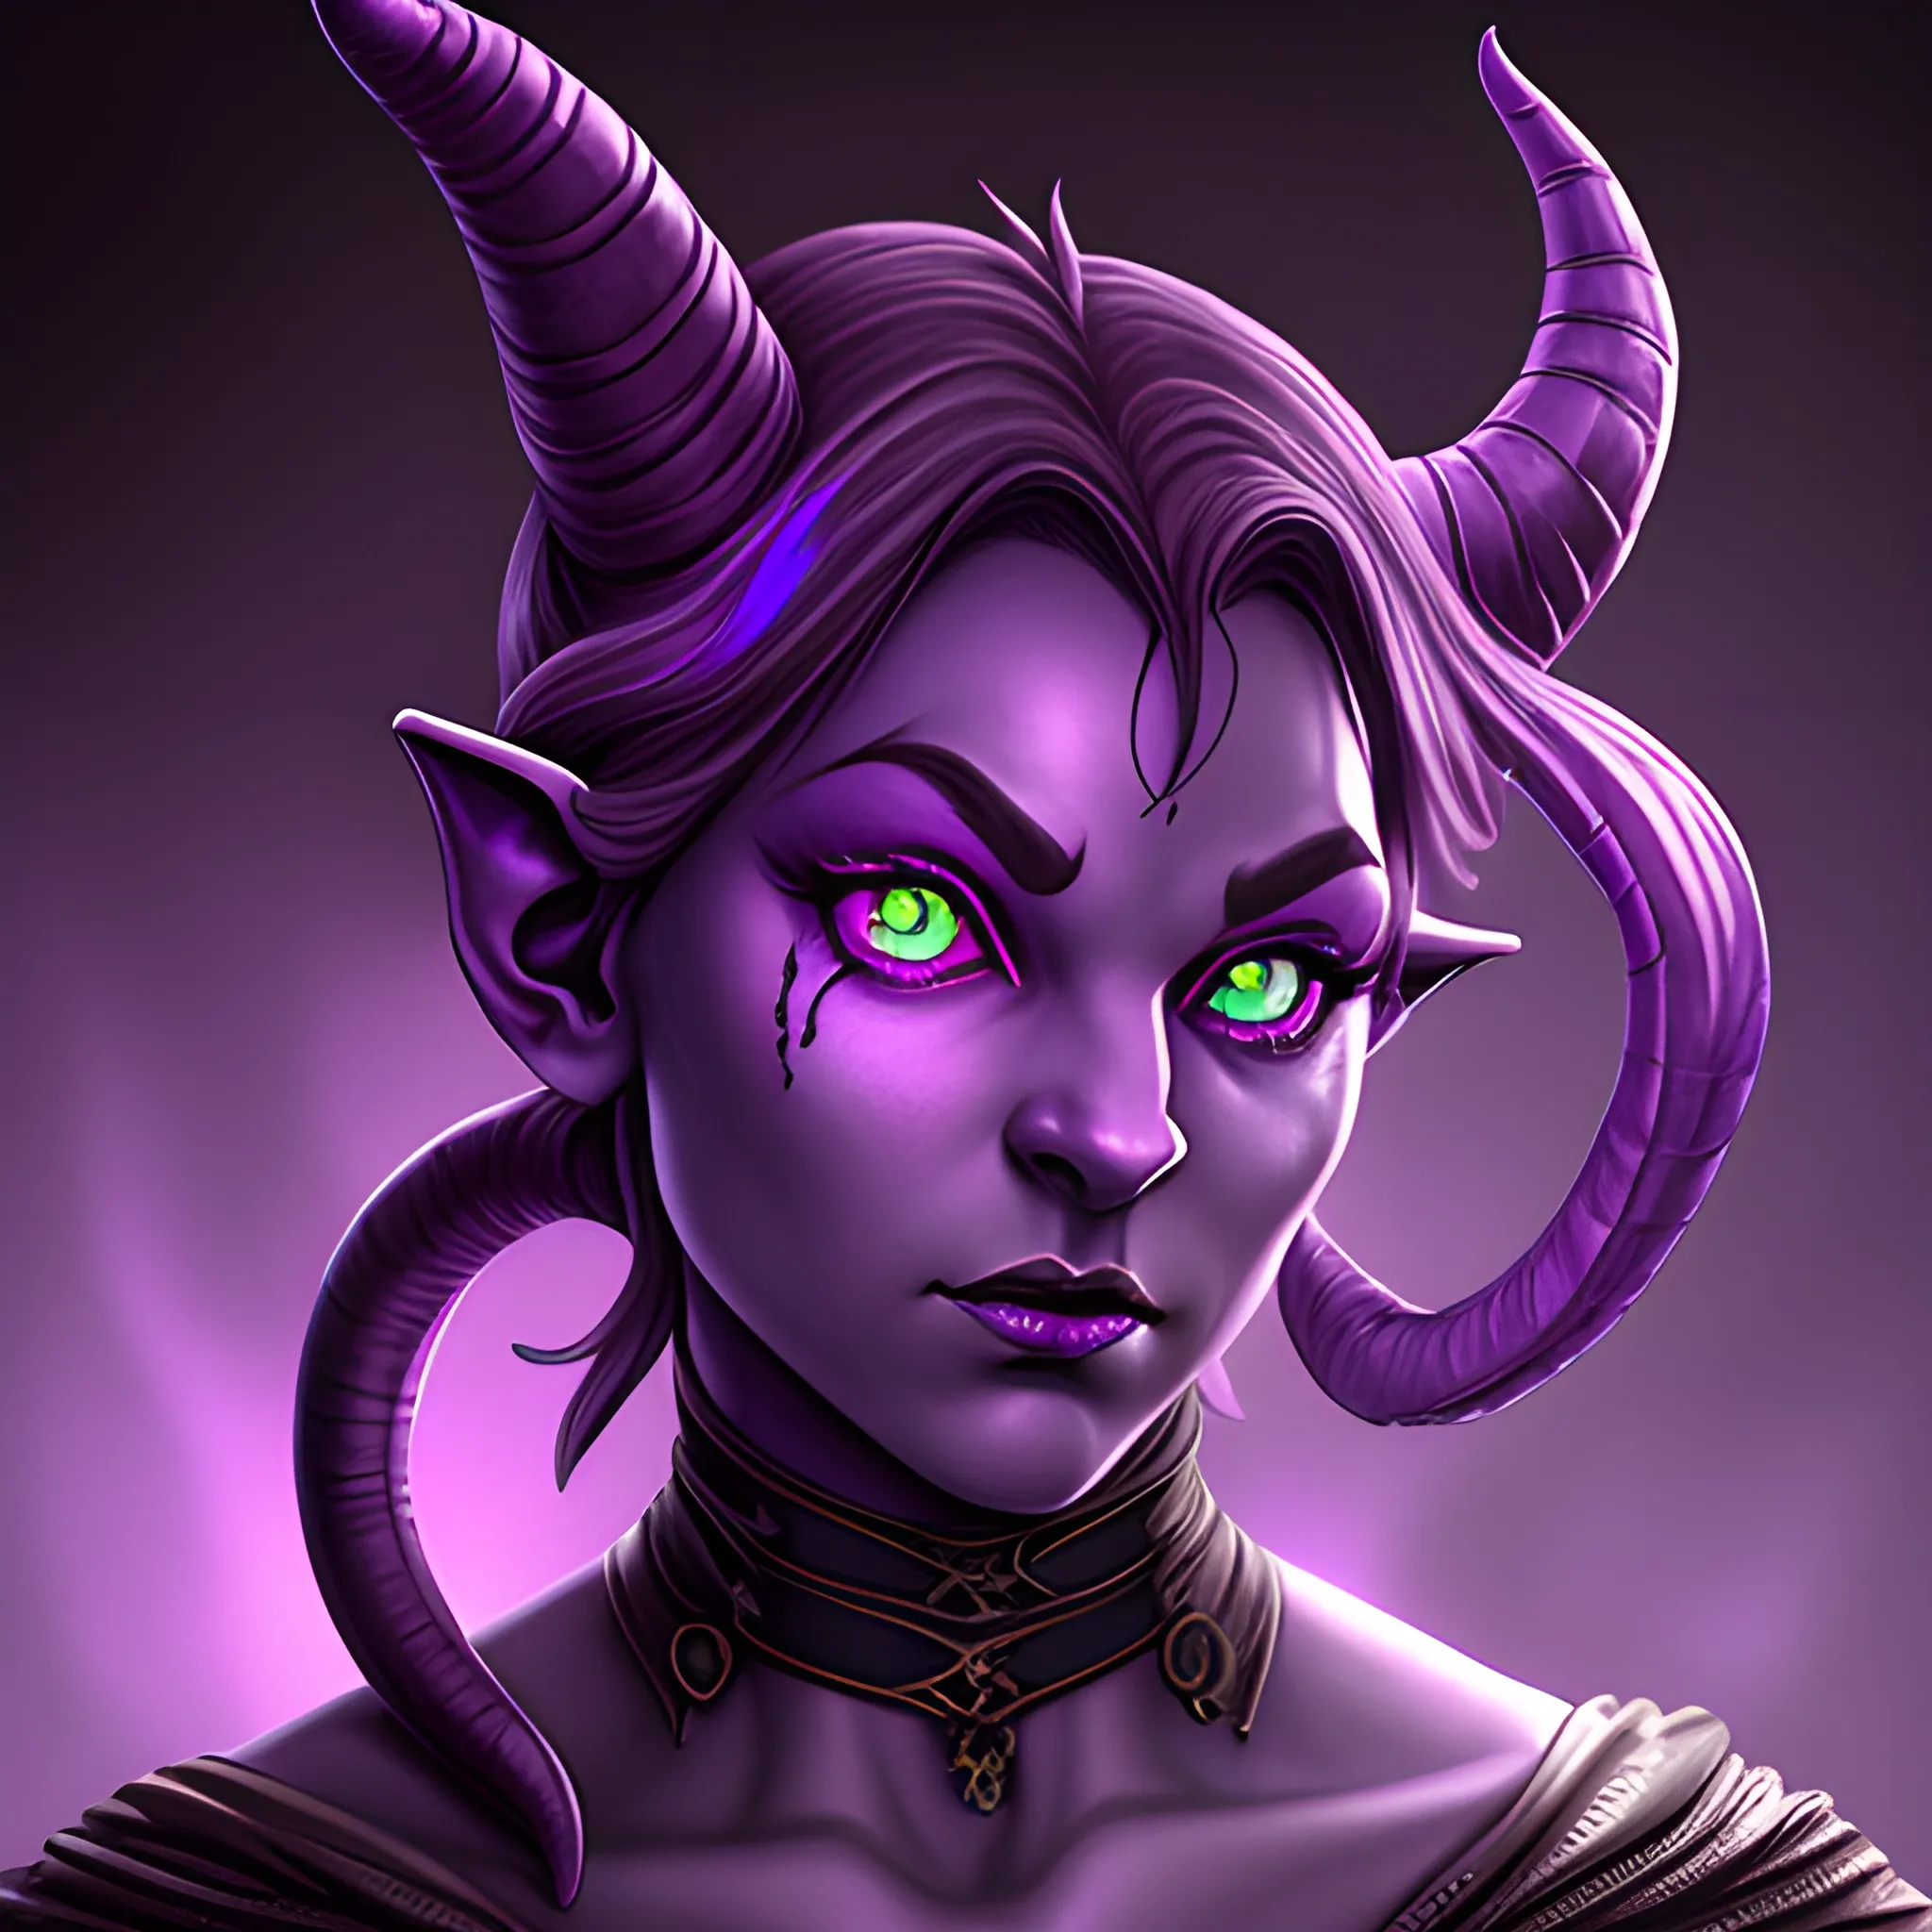 high definition, fantasy, purple female tiefling with glowing eyes